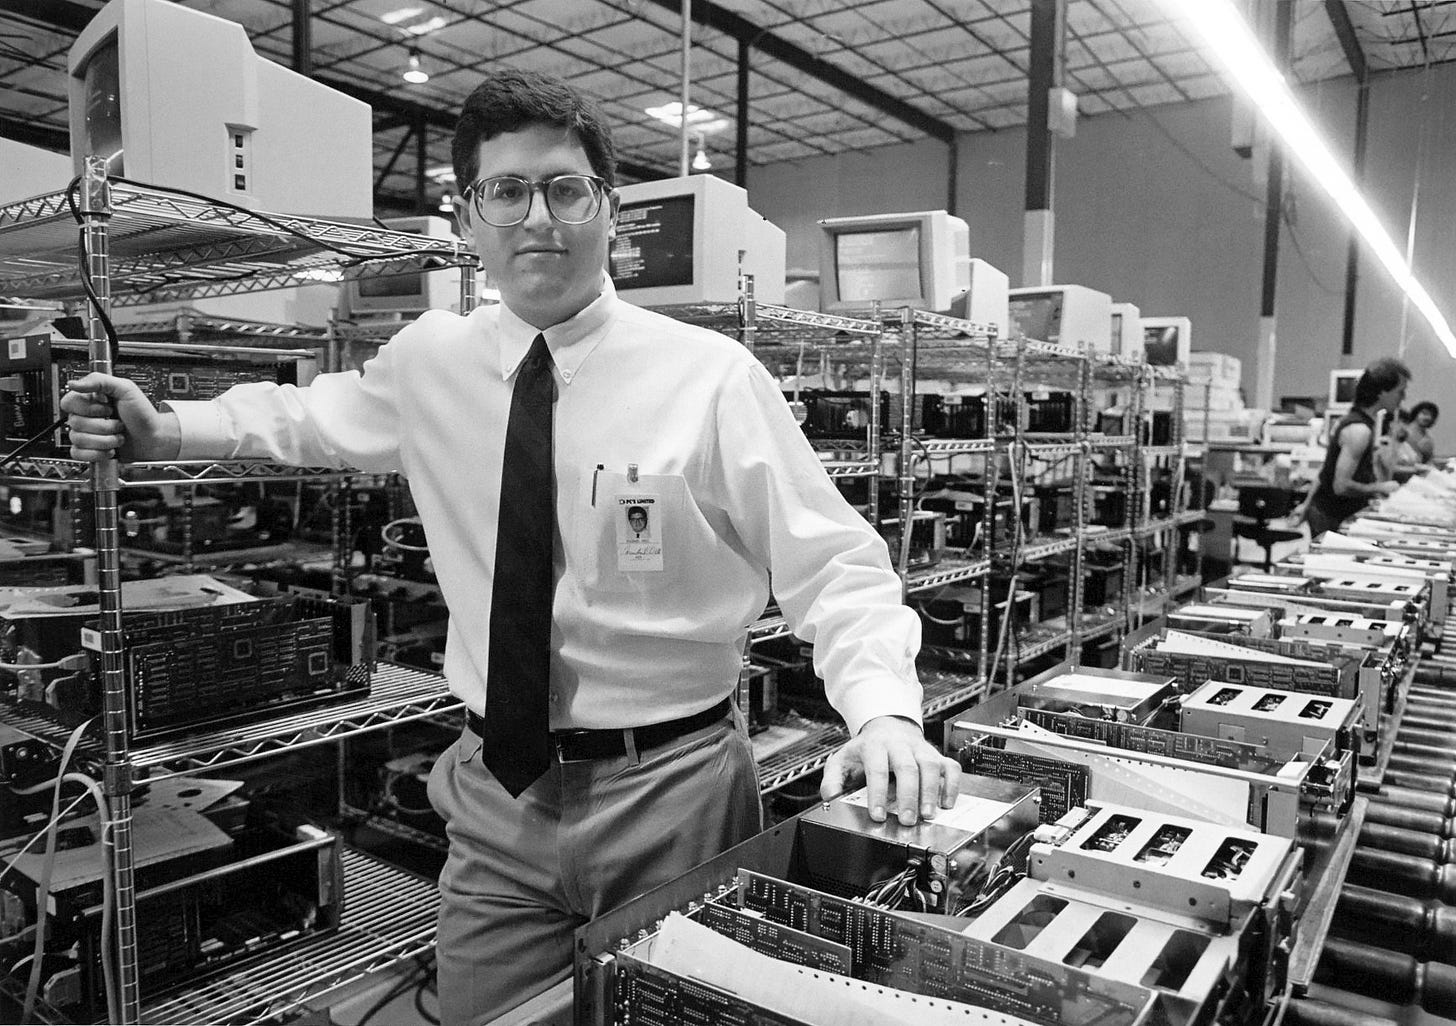 At age 19, Michael Dell founded PC's Limited with $1,000 and a game-changing vision for how technology should be designed, manufactured and sold.